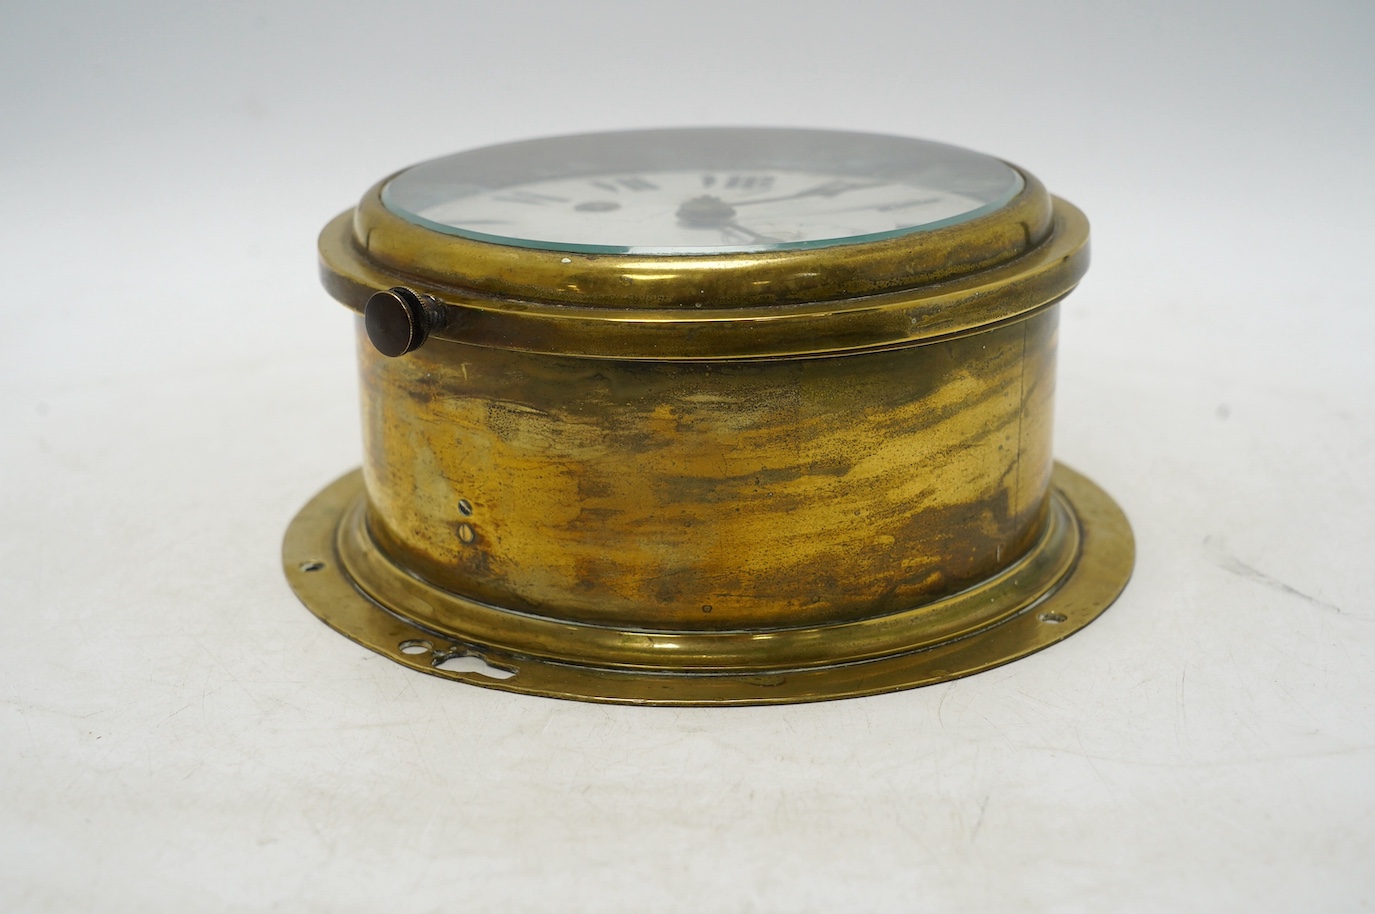 An early 20th century brass bulkhead timepiece retailed by Harrods, dial 13.5cm. Condition - poor to fair, seconds hand missing and some cracks to enamel dial